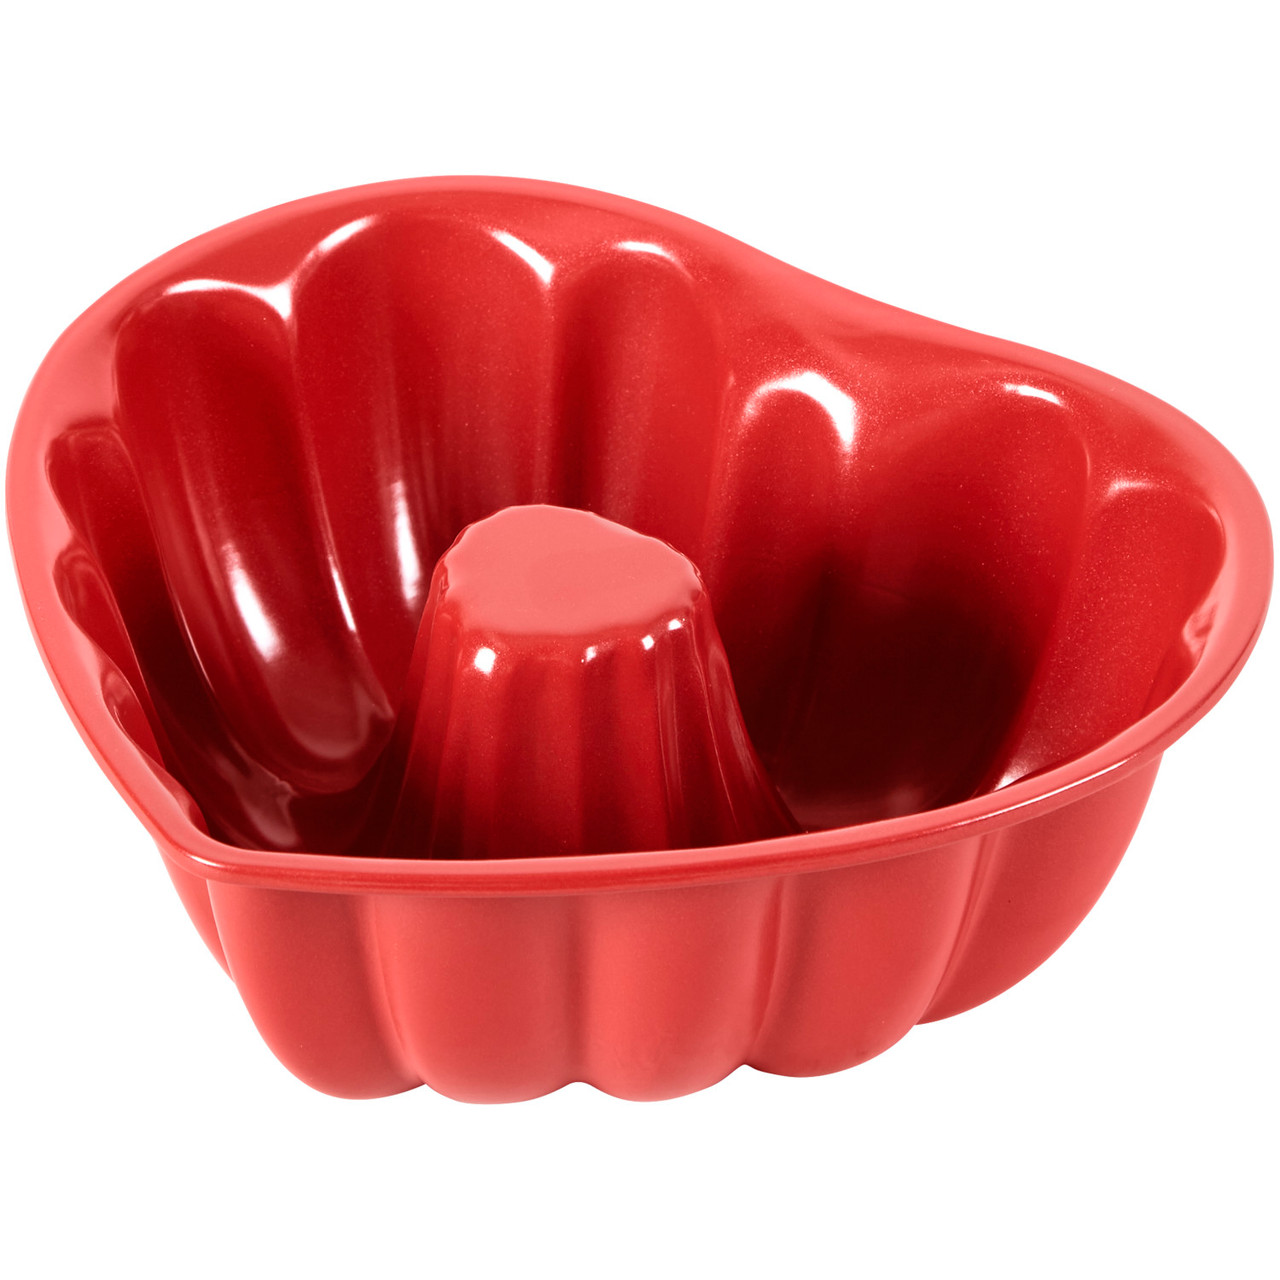 Red Heart-Shaped Non-Stick Fluted Tube Pan, 8-Inch - Wilton